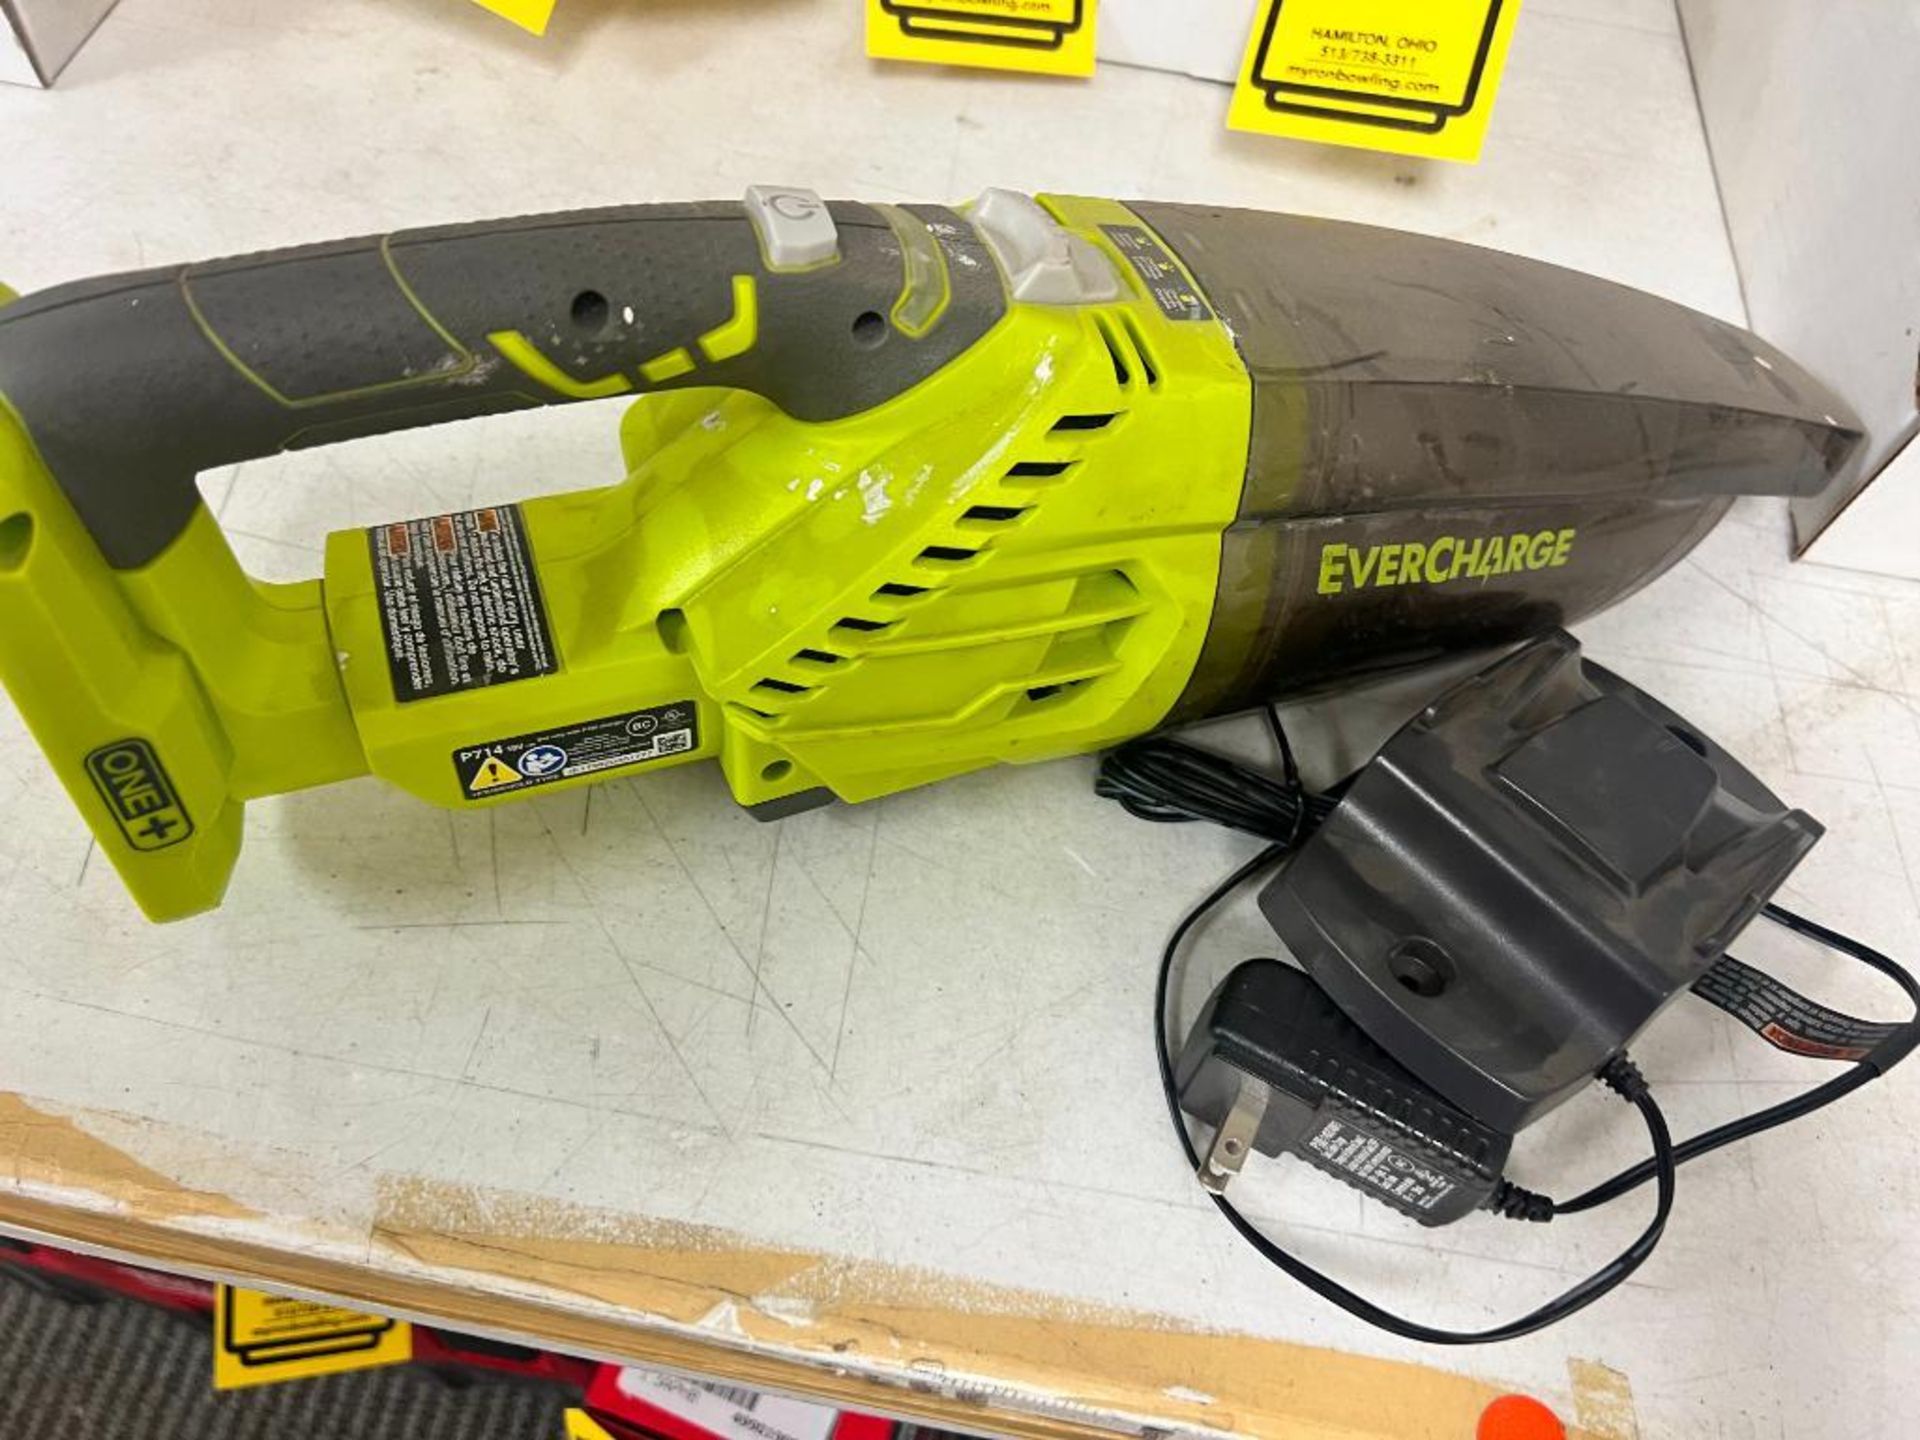 Ryobi Evercharge Cordless Vacuum, Model P714, w/ Charger (No Battery)